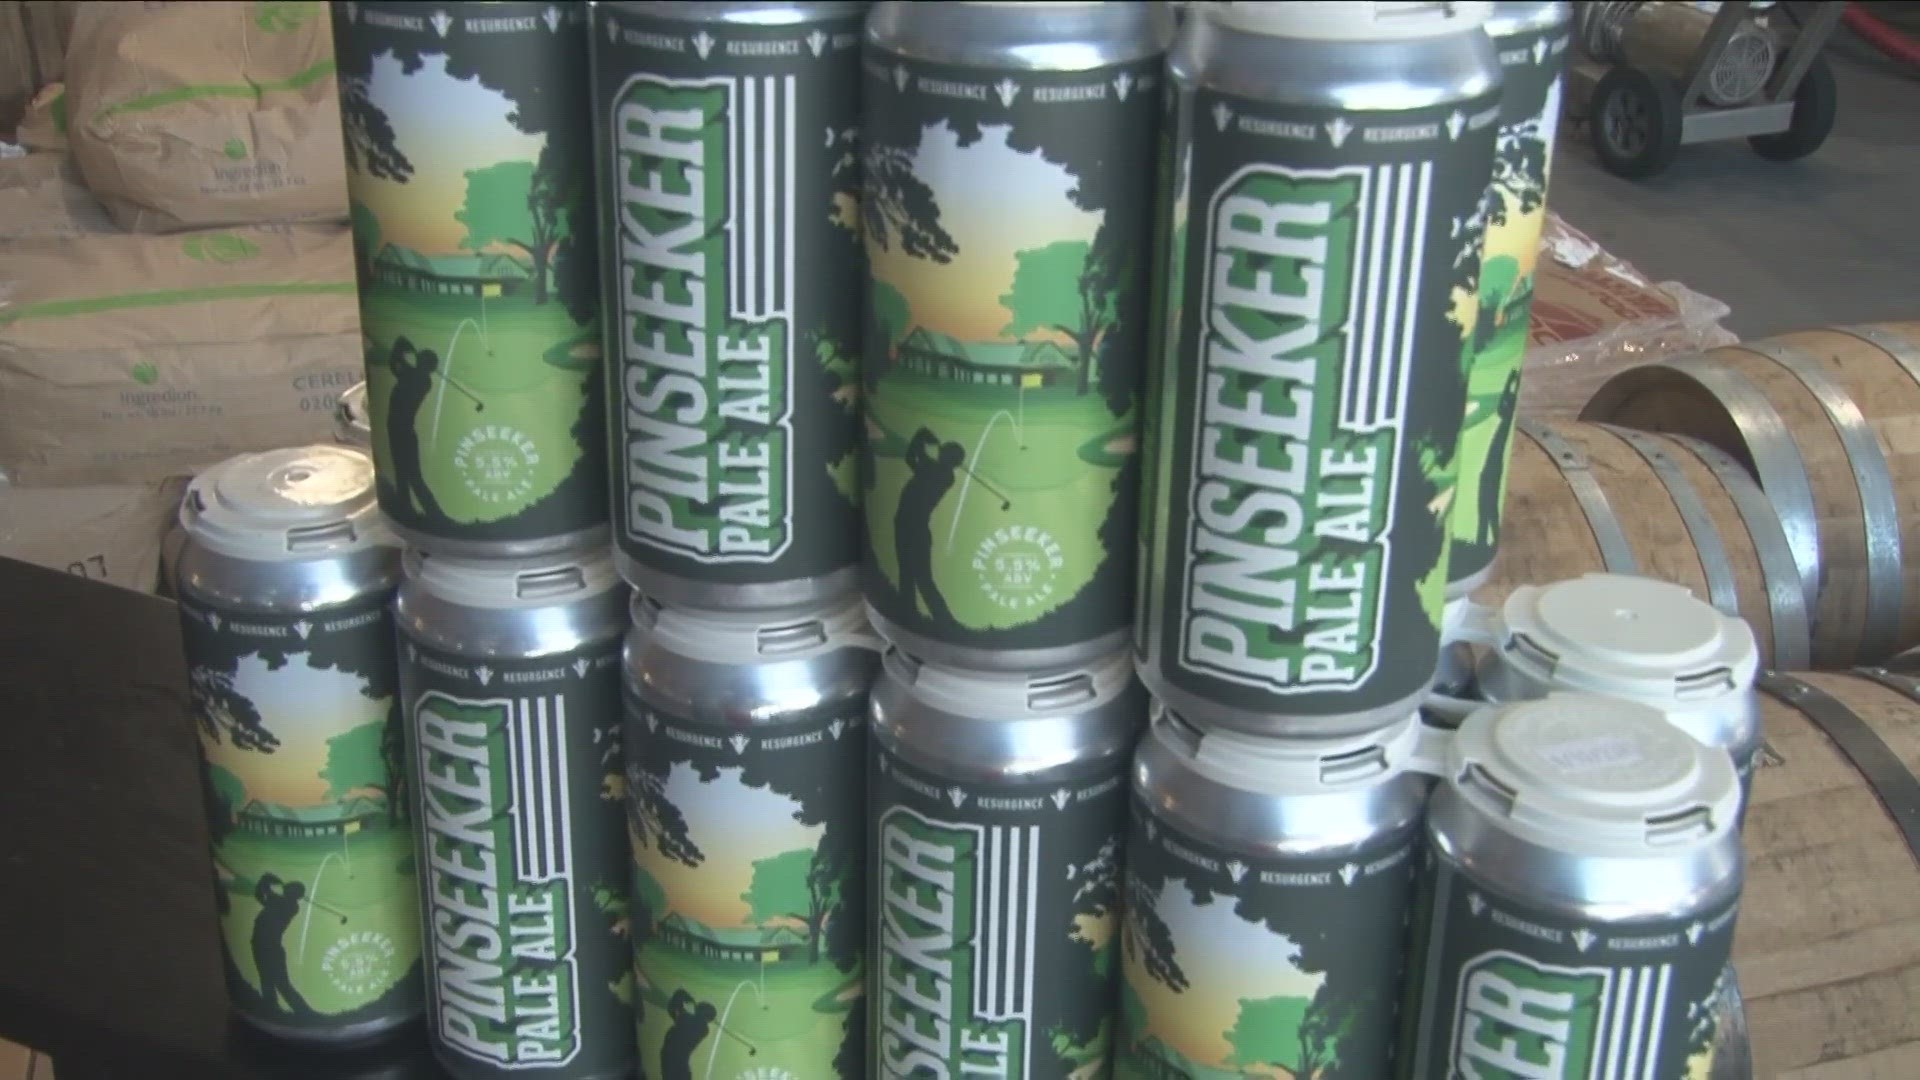 One of the beers sold at the PGA Championship, Pinseeker, was made right here in Buffalo at Resurgence Brewery.